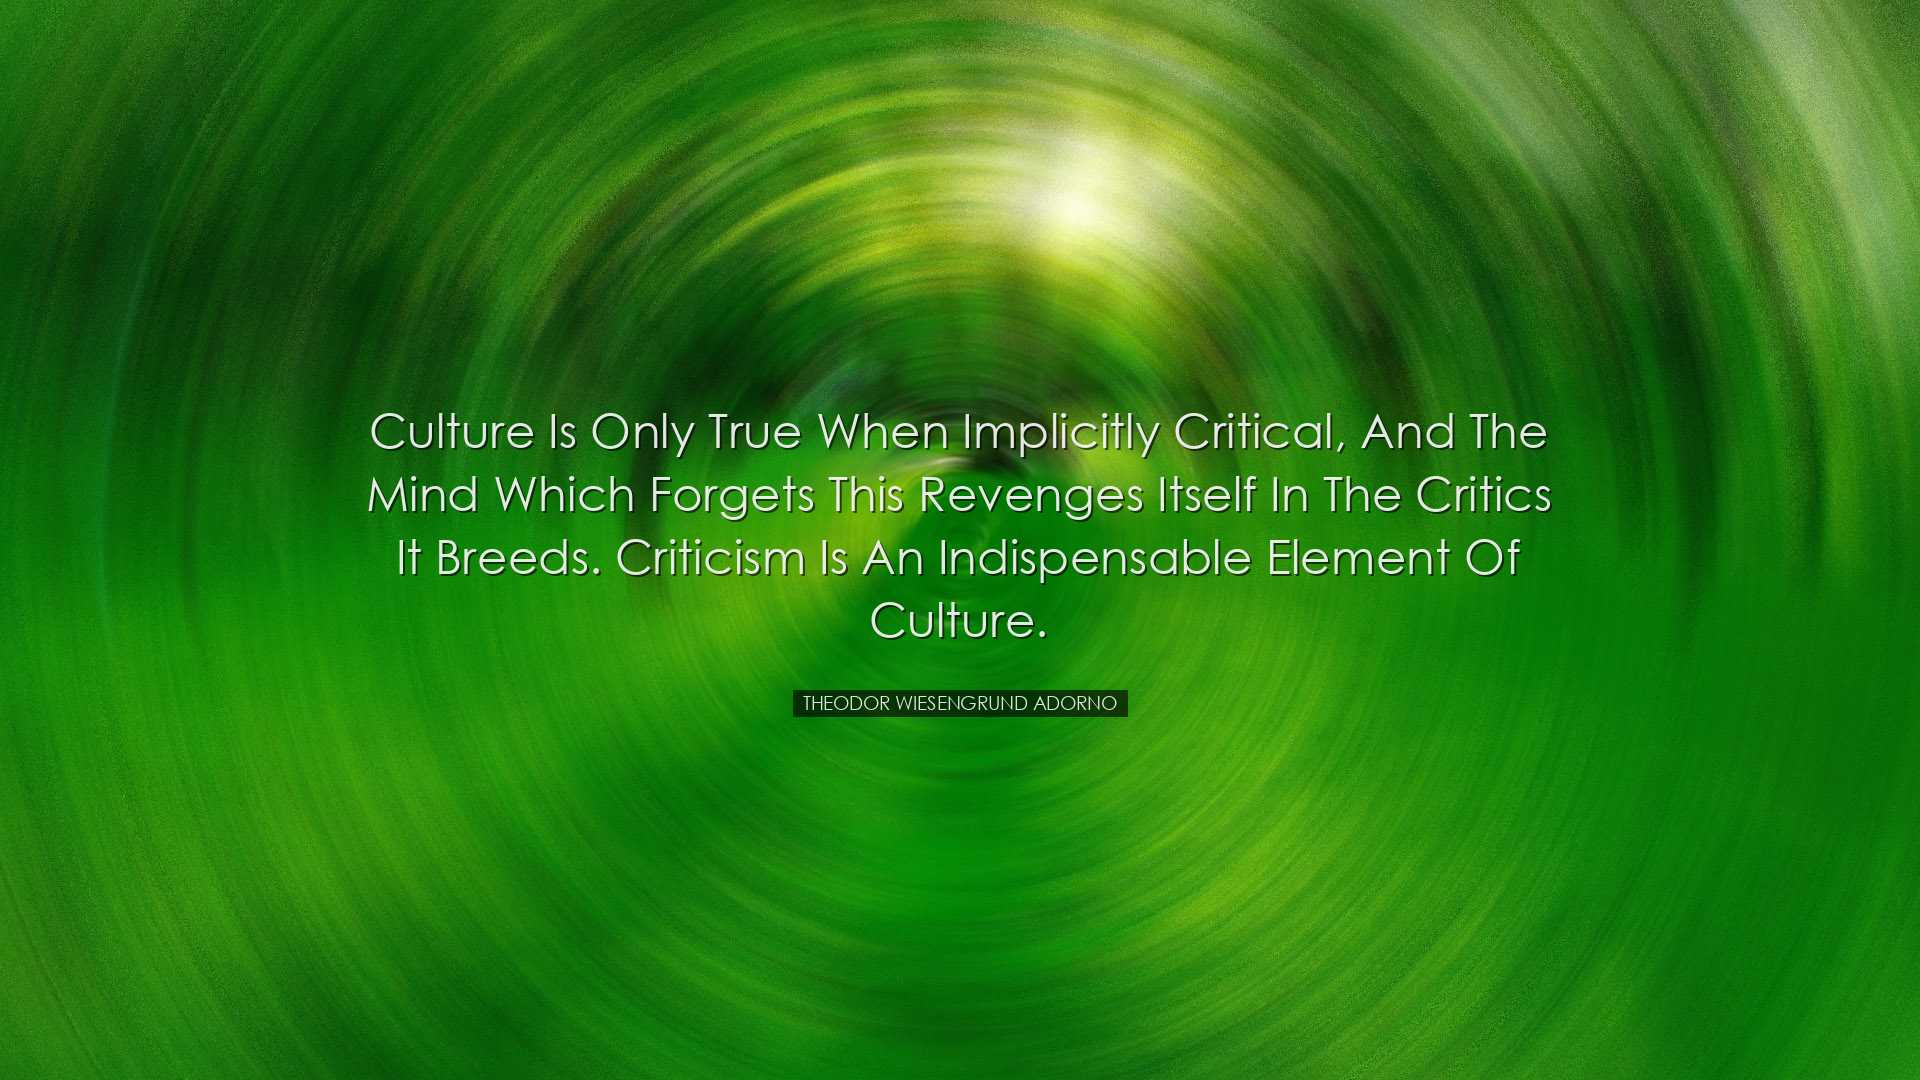 Culture is only true when implicitly critical, and the mind which